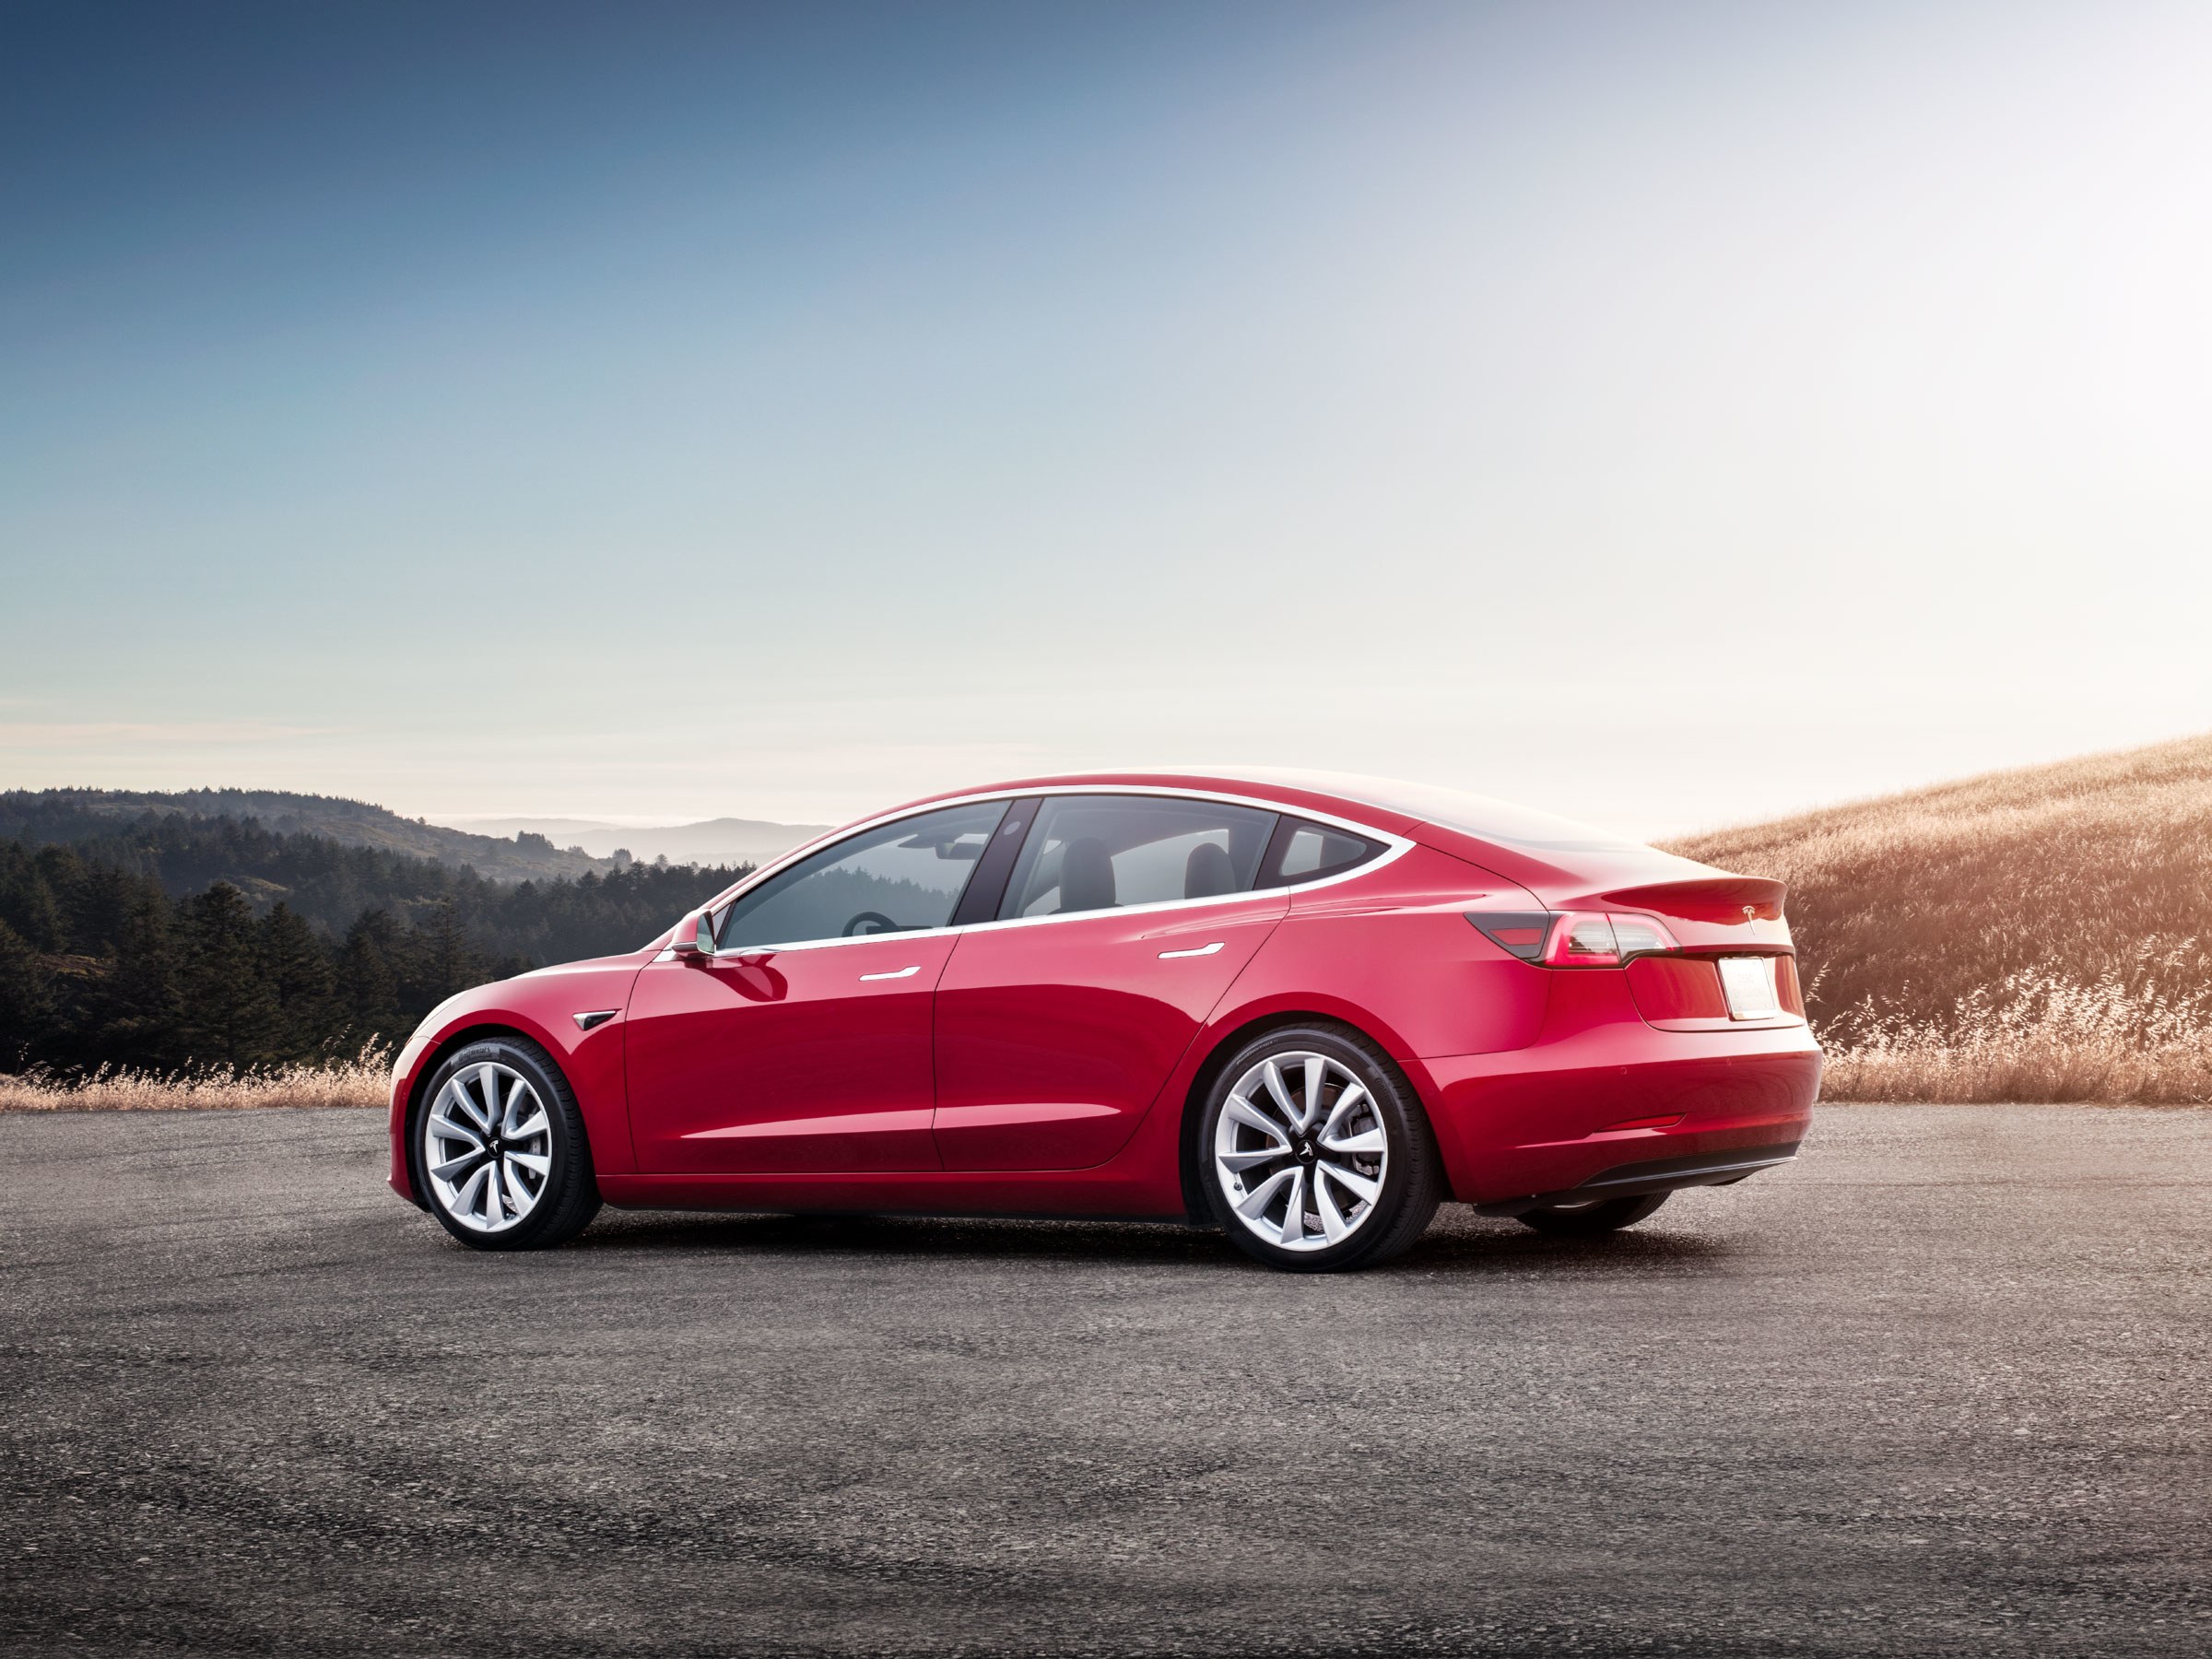 A red Tesla Model 3 parked outdoor with a scenic backdrop, serves as a sleek HD wallpaper for Tesla Motors enthusiasts.